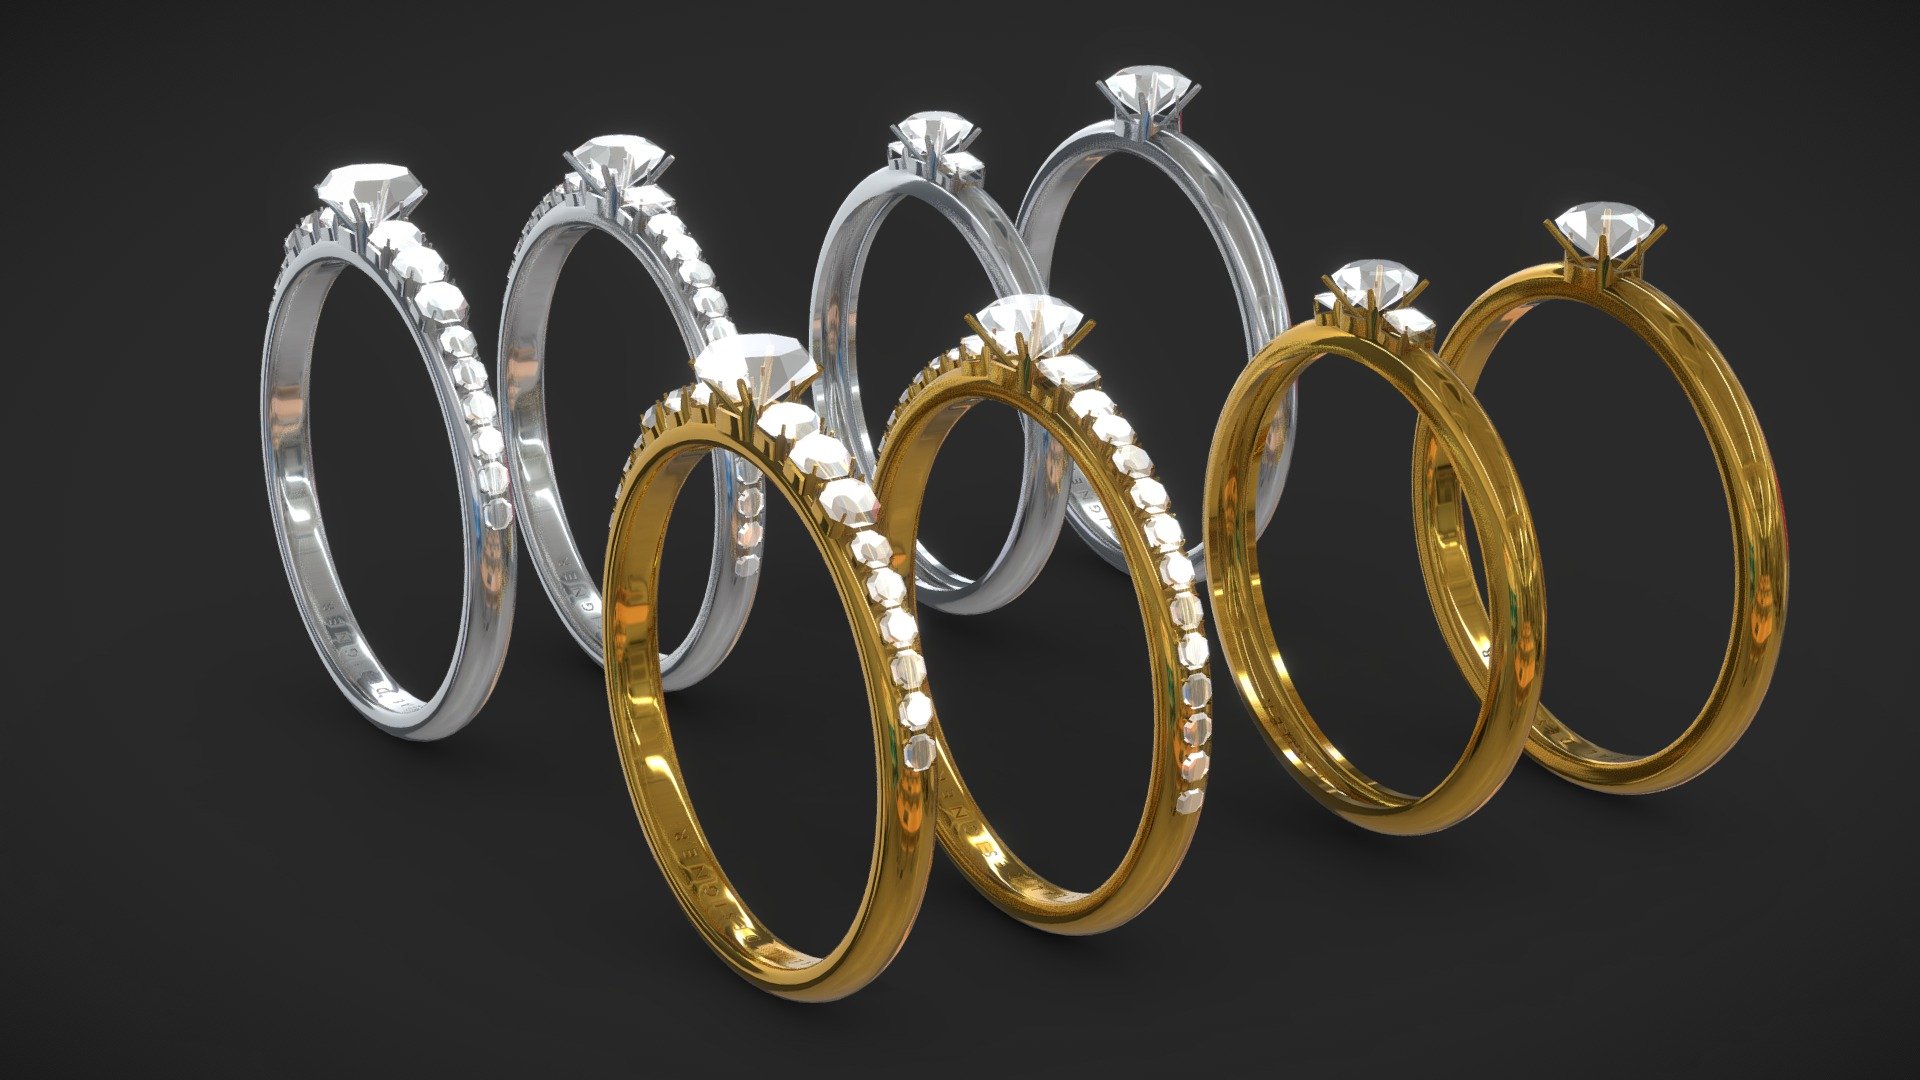 3 Unique Diamond Wedding Rings / Wedding Bands. 2 Materials Types Sized in 16mm and easily scalable for resizing.

Diamonds based on 1.5 carat, 1 carat, 0.5 carat and 0.25 carat

Metaverse ready VR Ready - Wedding Diamond Ring Pack - 16mm Gold and Silver - Buy Royalty Free 3D model by Unreal Designer (@unrealdesigner.ig) 3d model